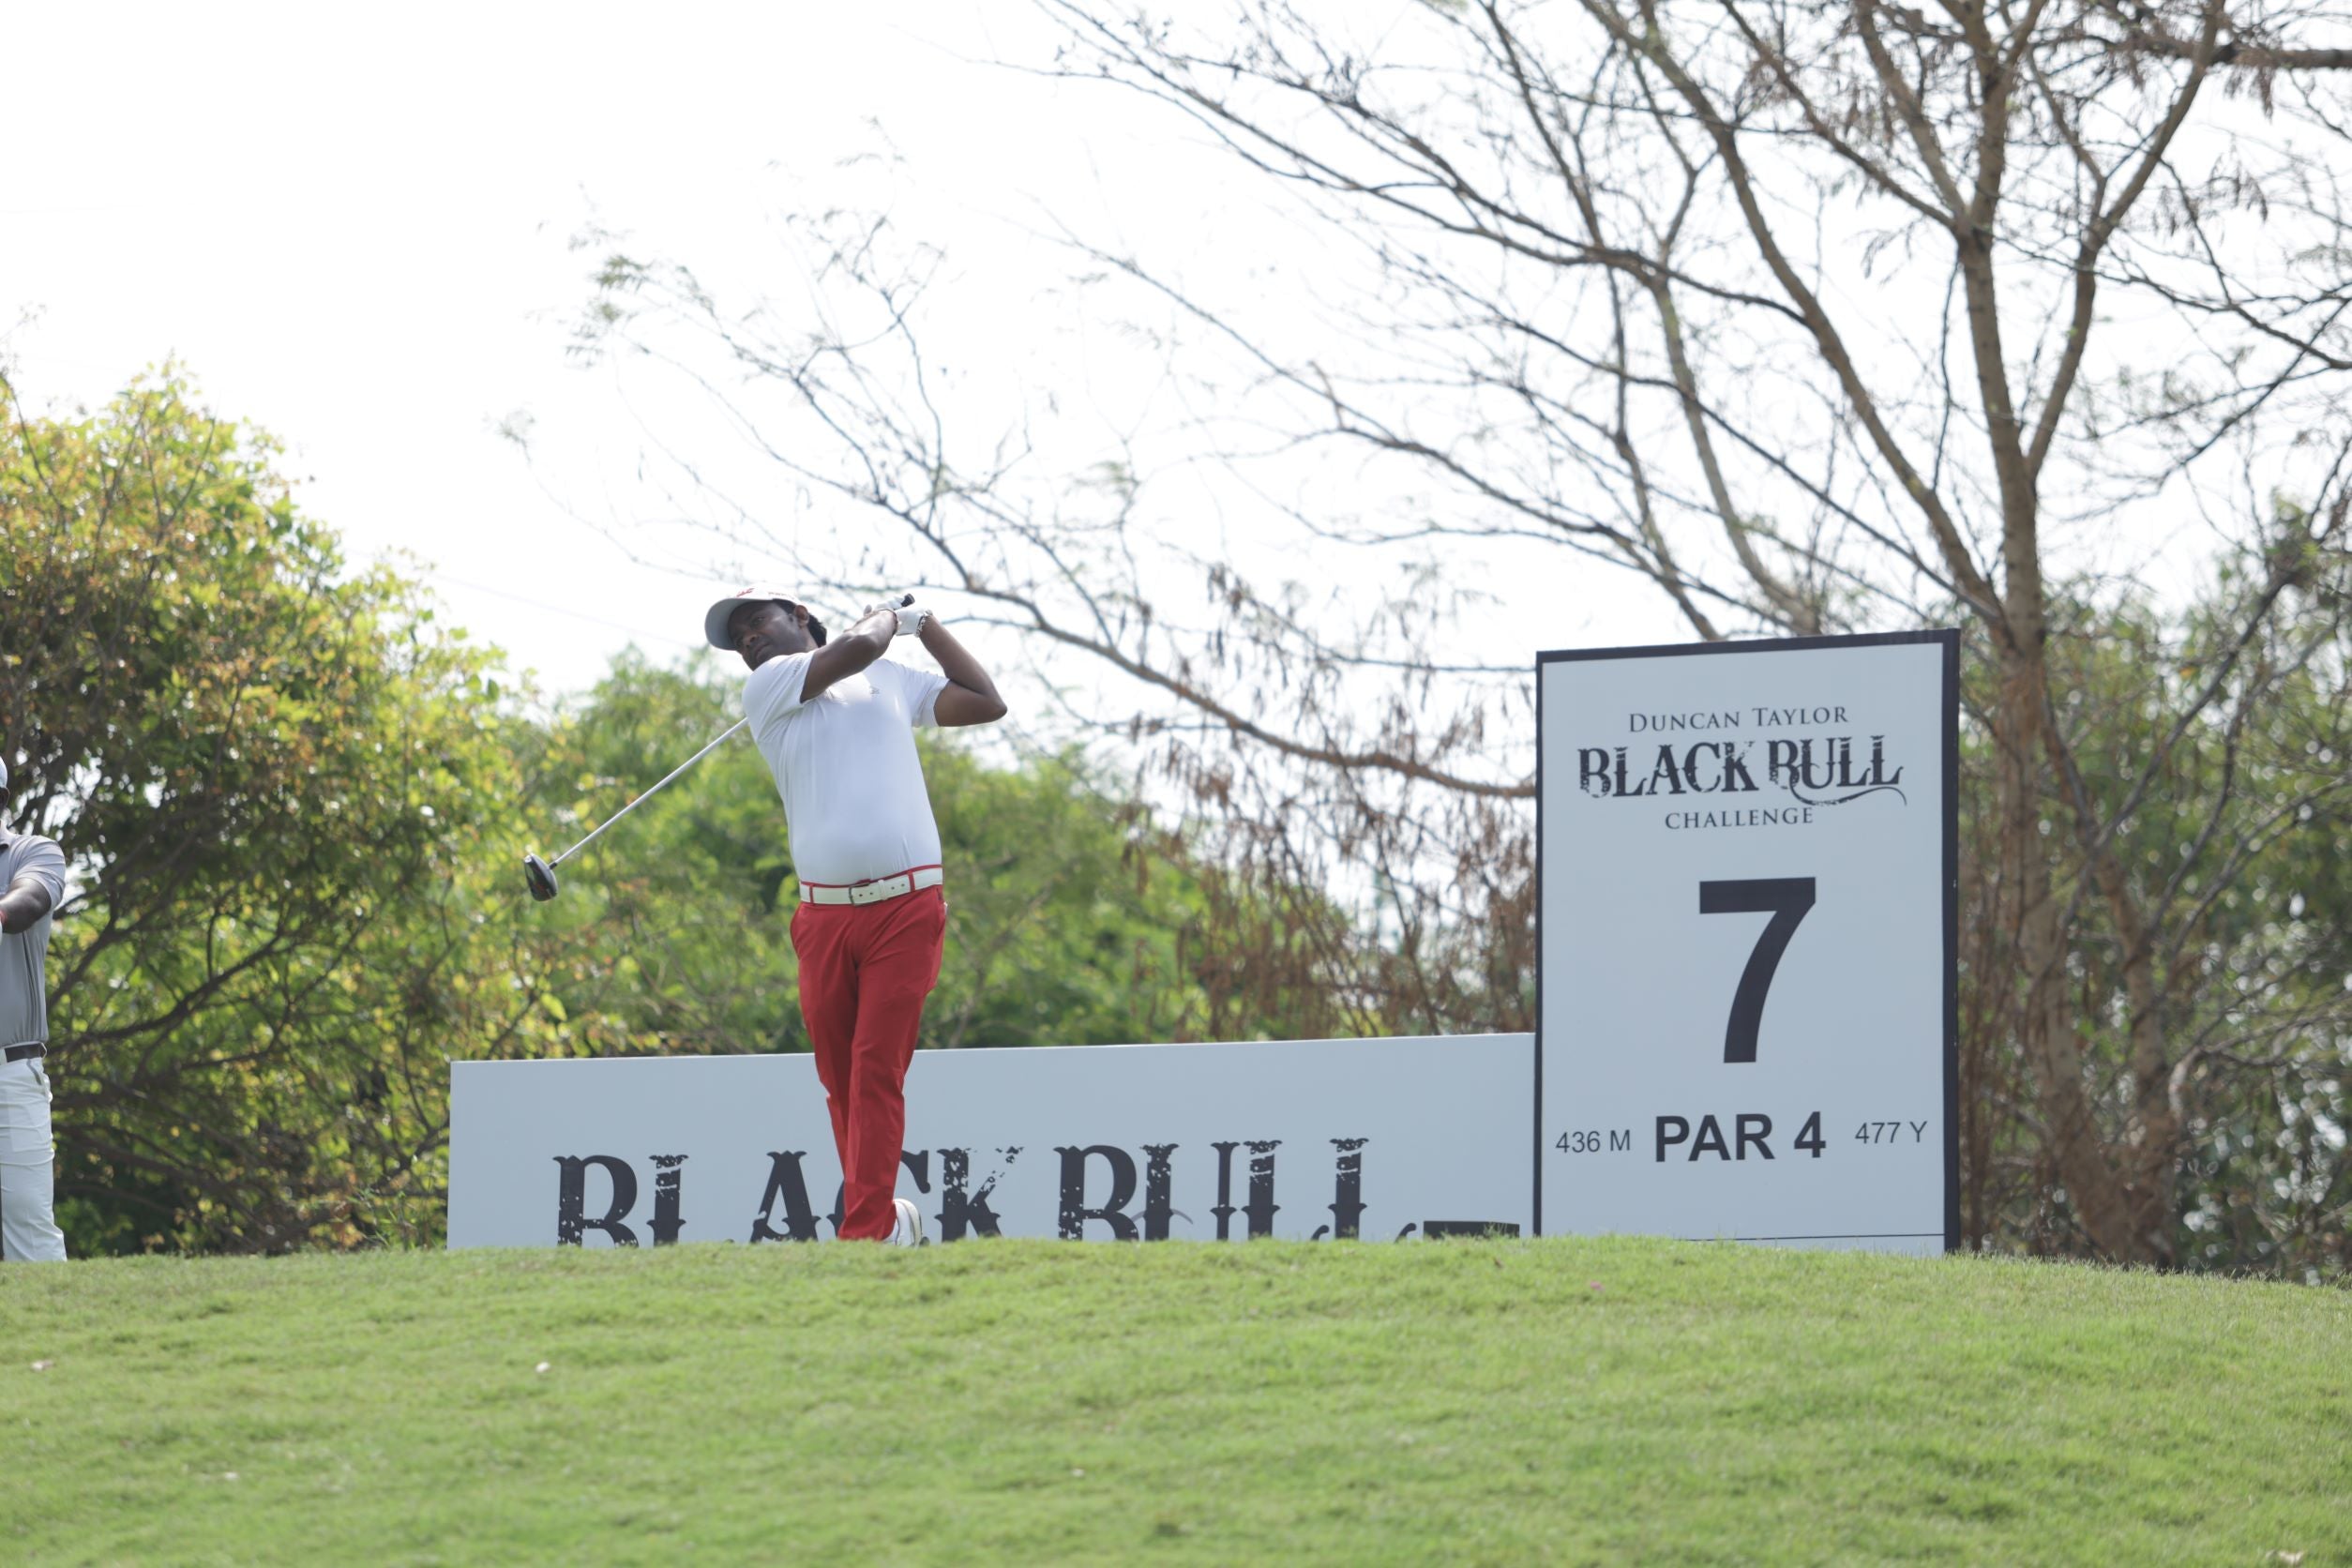 Om Prakash Chouhan’s spectacular rear-guard action propels him into tied second to raise Indian hopes, Chouhan trails leader Lorenzo Scalise of Italy by two shots